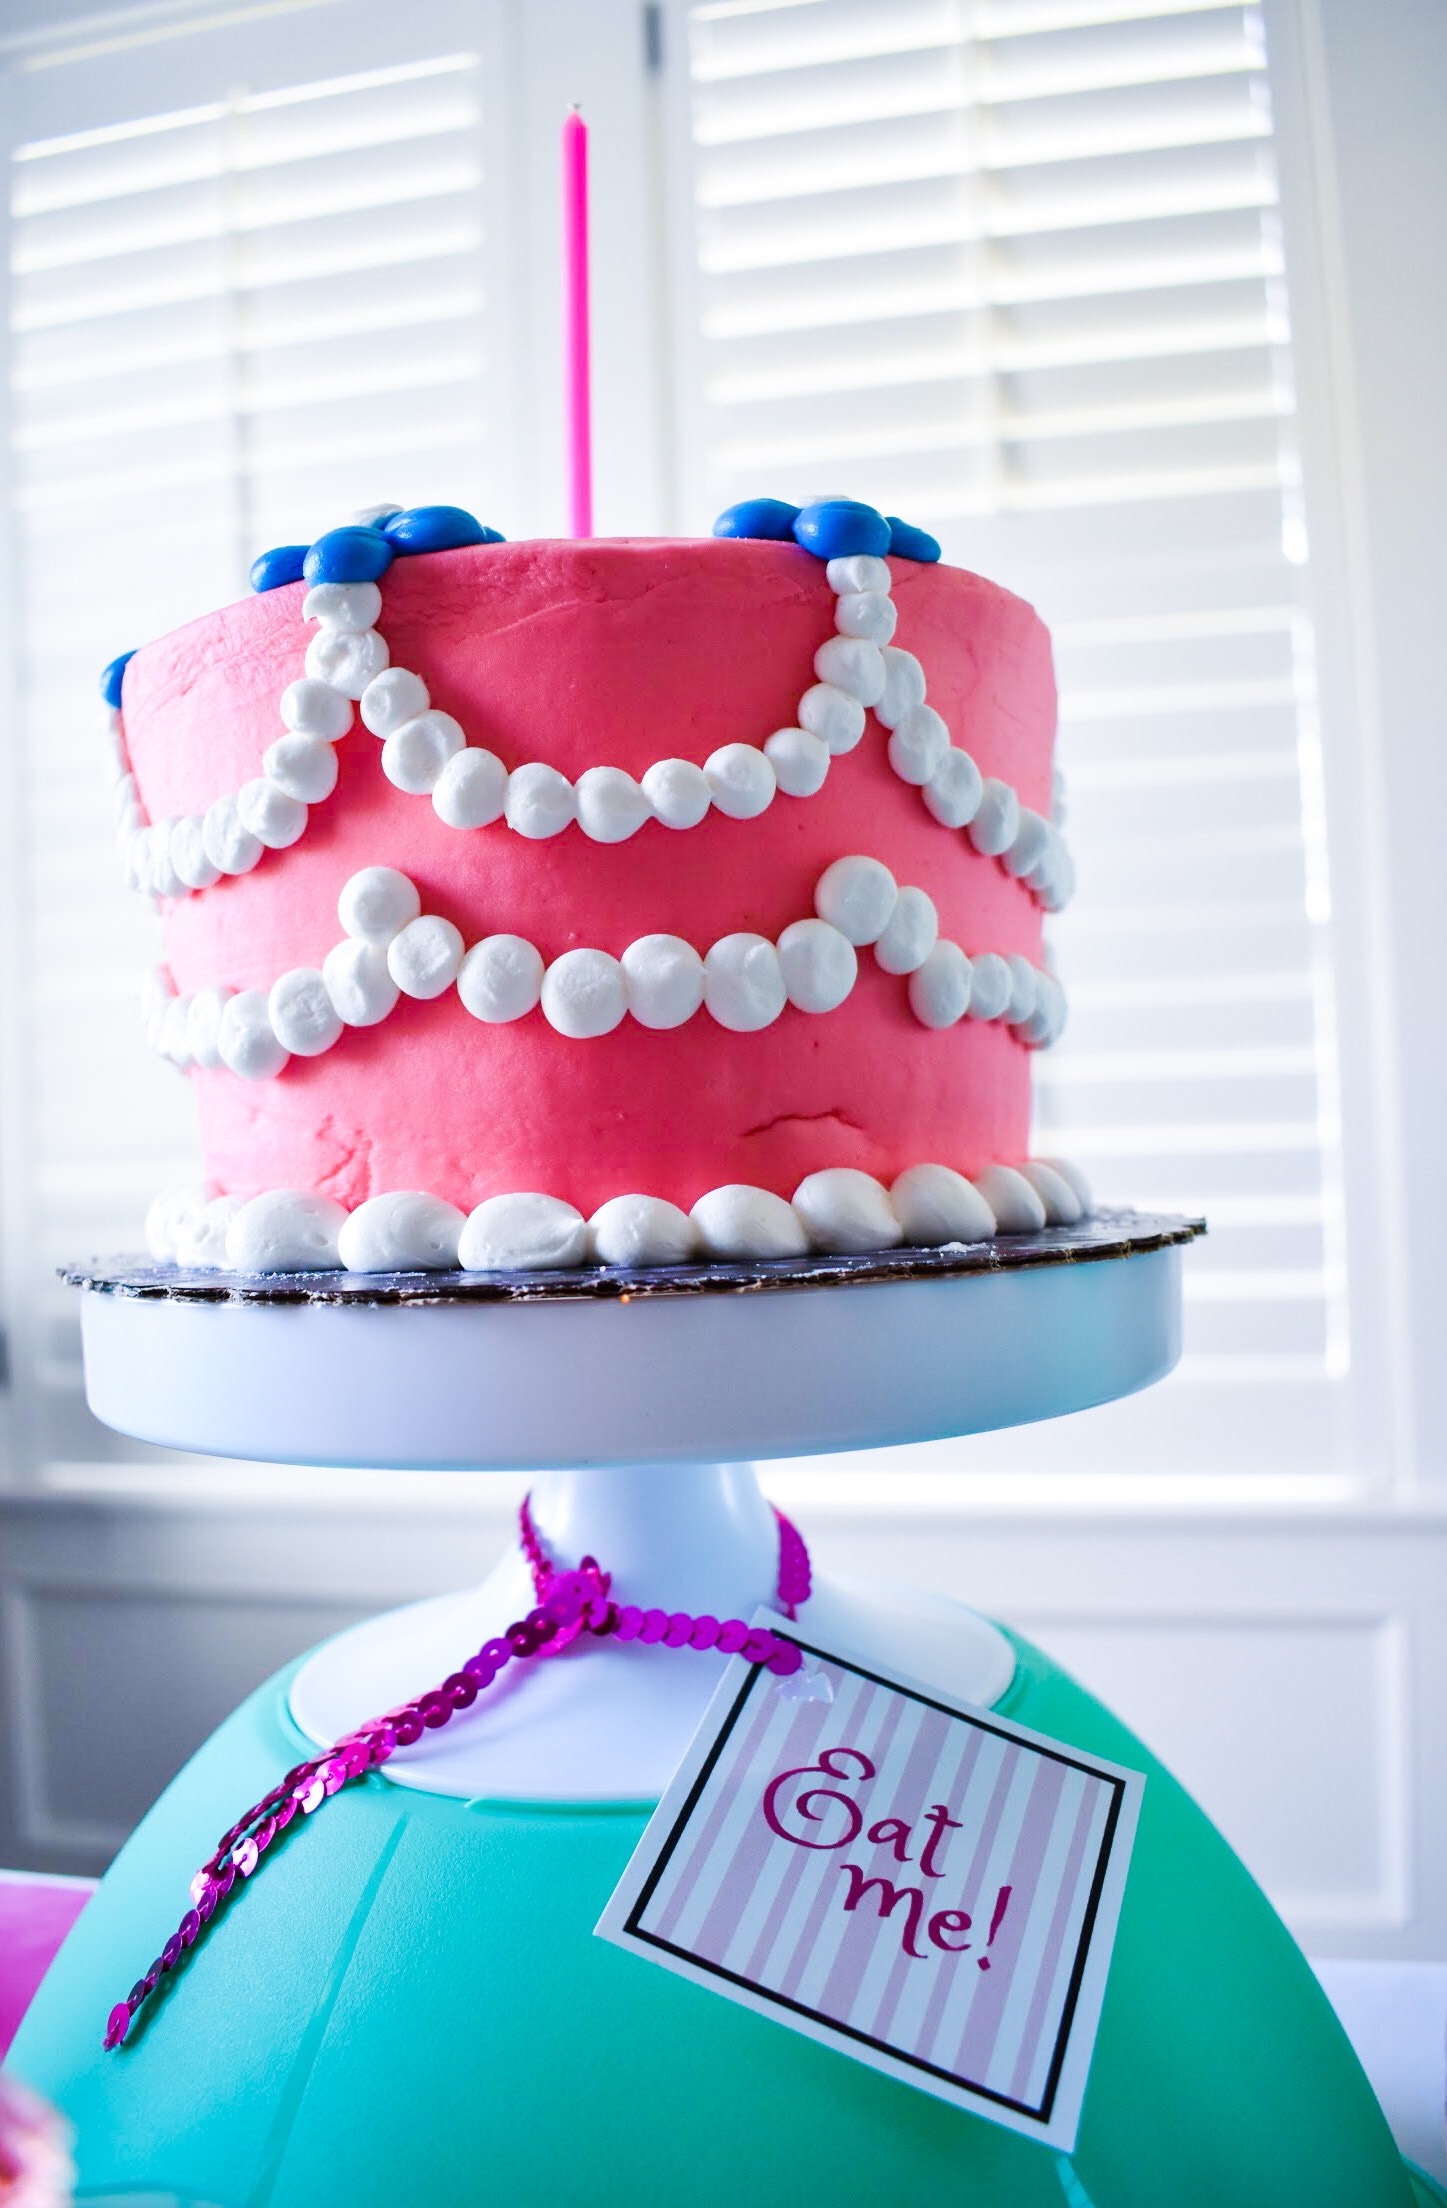 Alice in ONEderland Birthday Party - Alice in ONEderland First Birthday Party - Alice in Wonderland Birthday Party - Alice in Wonderland First Birthday Party - Inspiration, Decor, Ideas, Inspo, Decorations, Smash Cake, Cookies, Dessert Table, Desserts, Quotes, Photos, and more for your Alice in ONEderland themed First Birthday Party, one of the cutest first birthday party themes for girls I've ever seen! #AliceinWonderland #AliceinONEderland #BirthdayParty #FirstBirthday #PartyIdeas